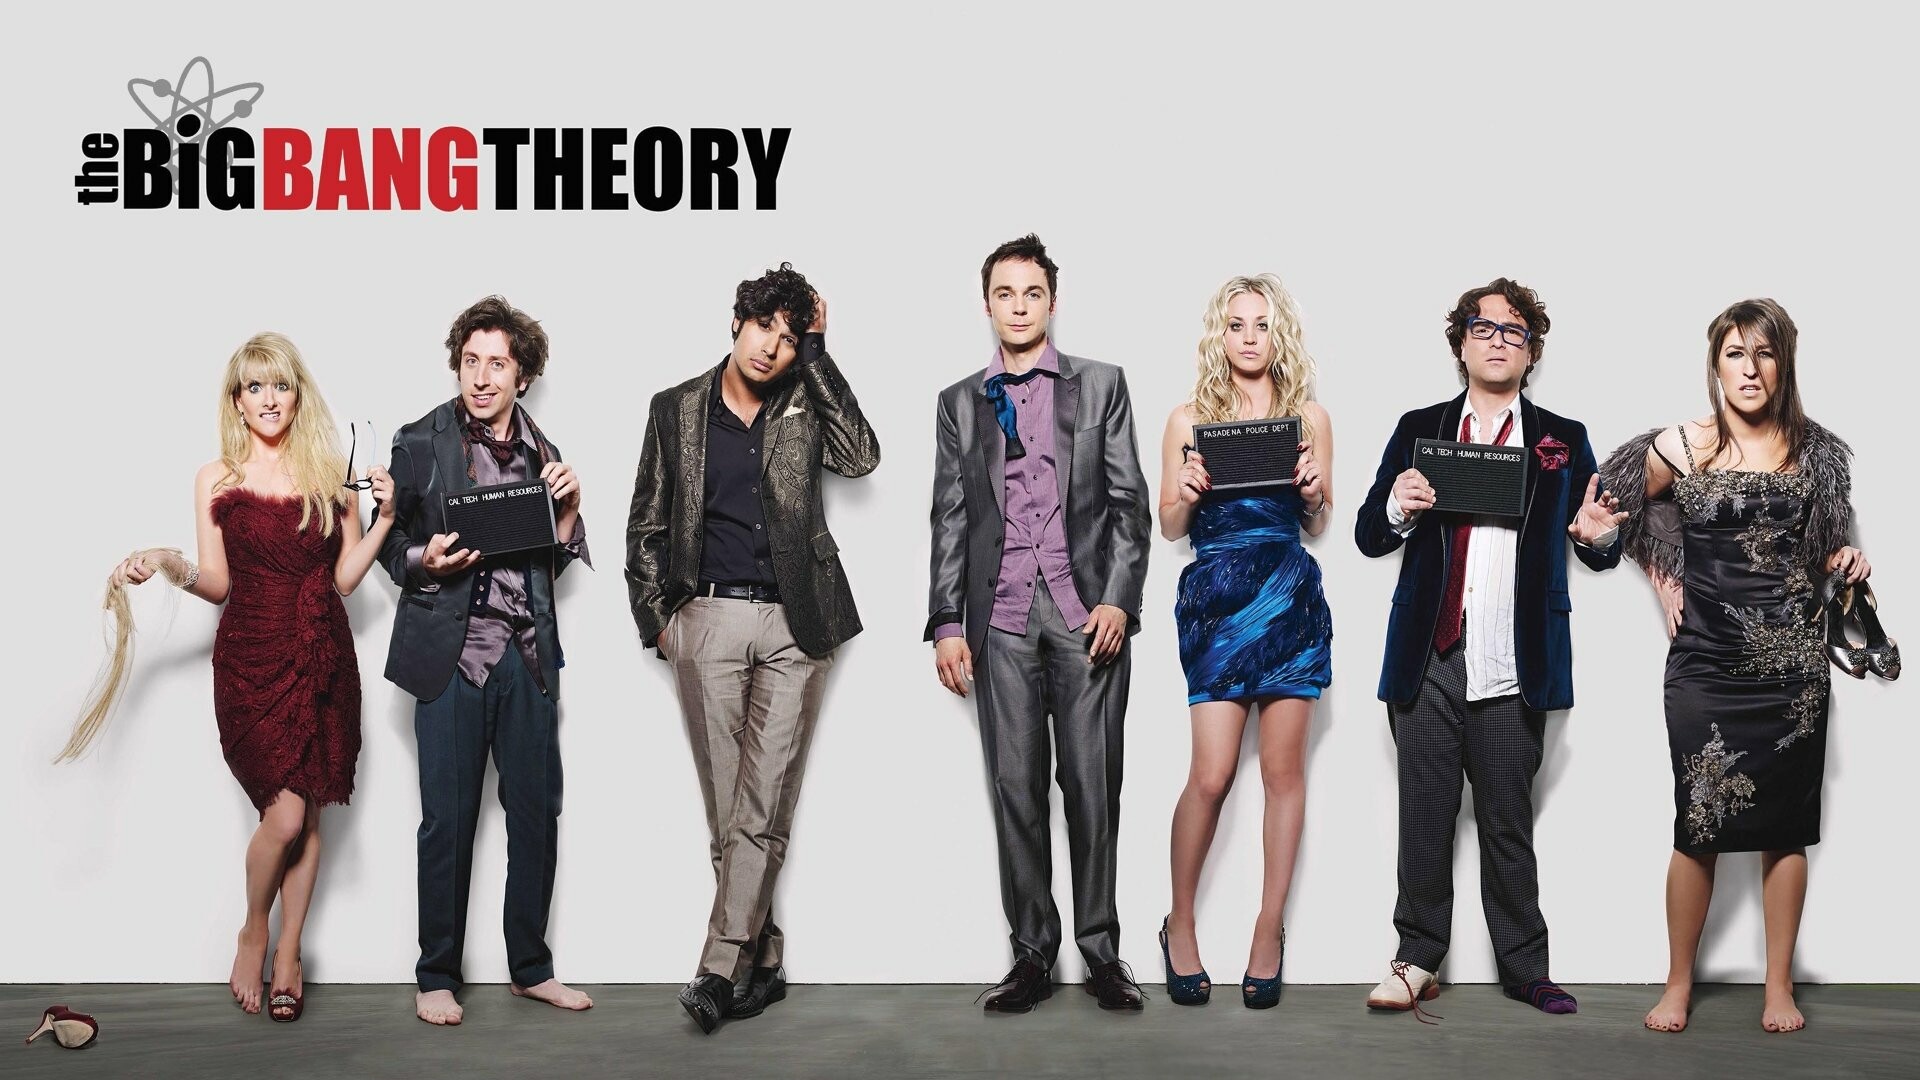 The Big Bang Theory: CBS, Geeks, Nerds, Scientists, Caltech. 1920x1080 Full HD Background.